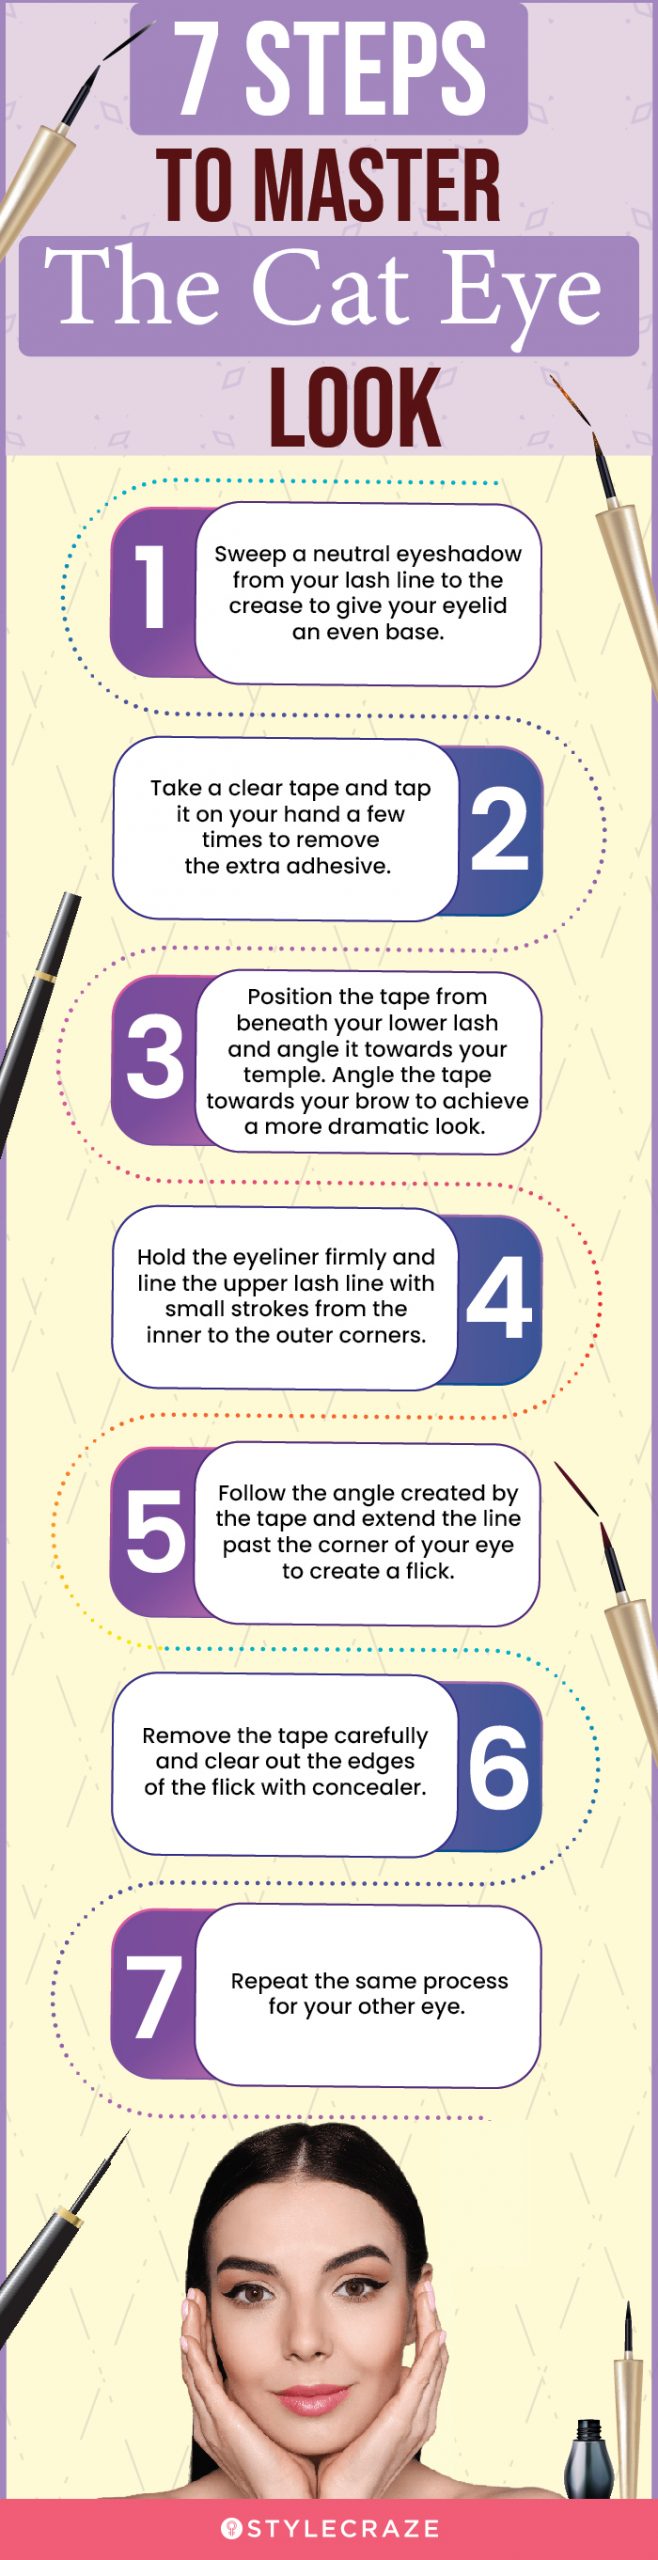 7 Steps To Master The Cat Eye Look (infographic)